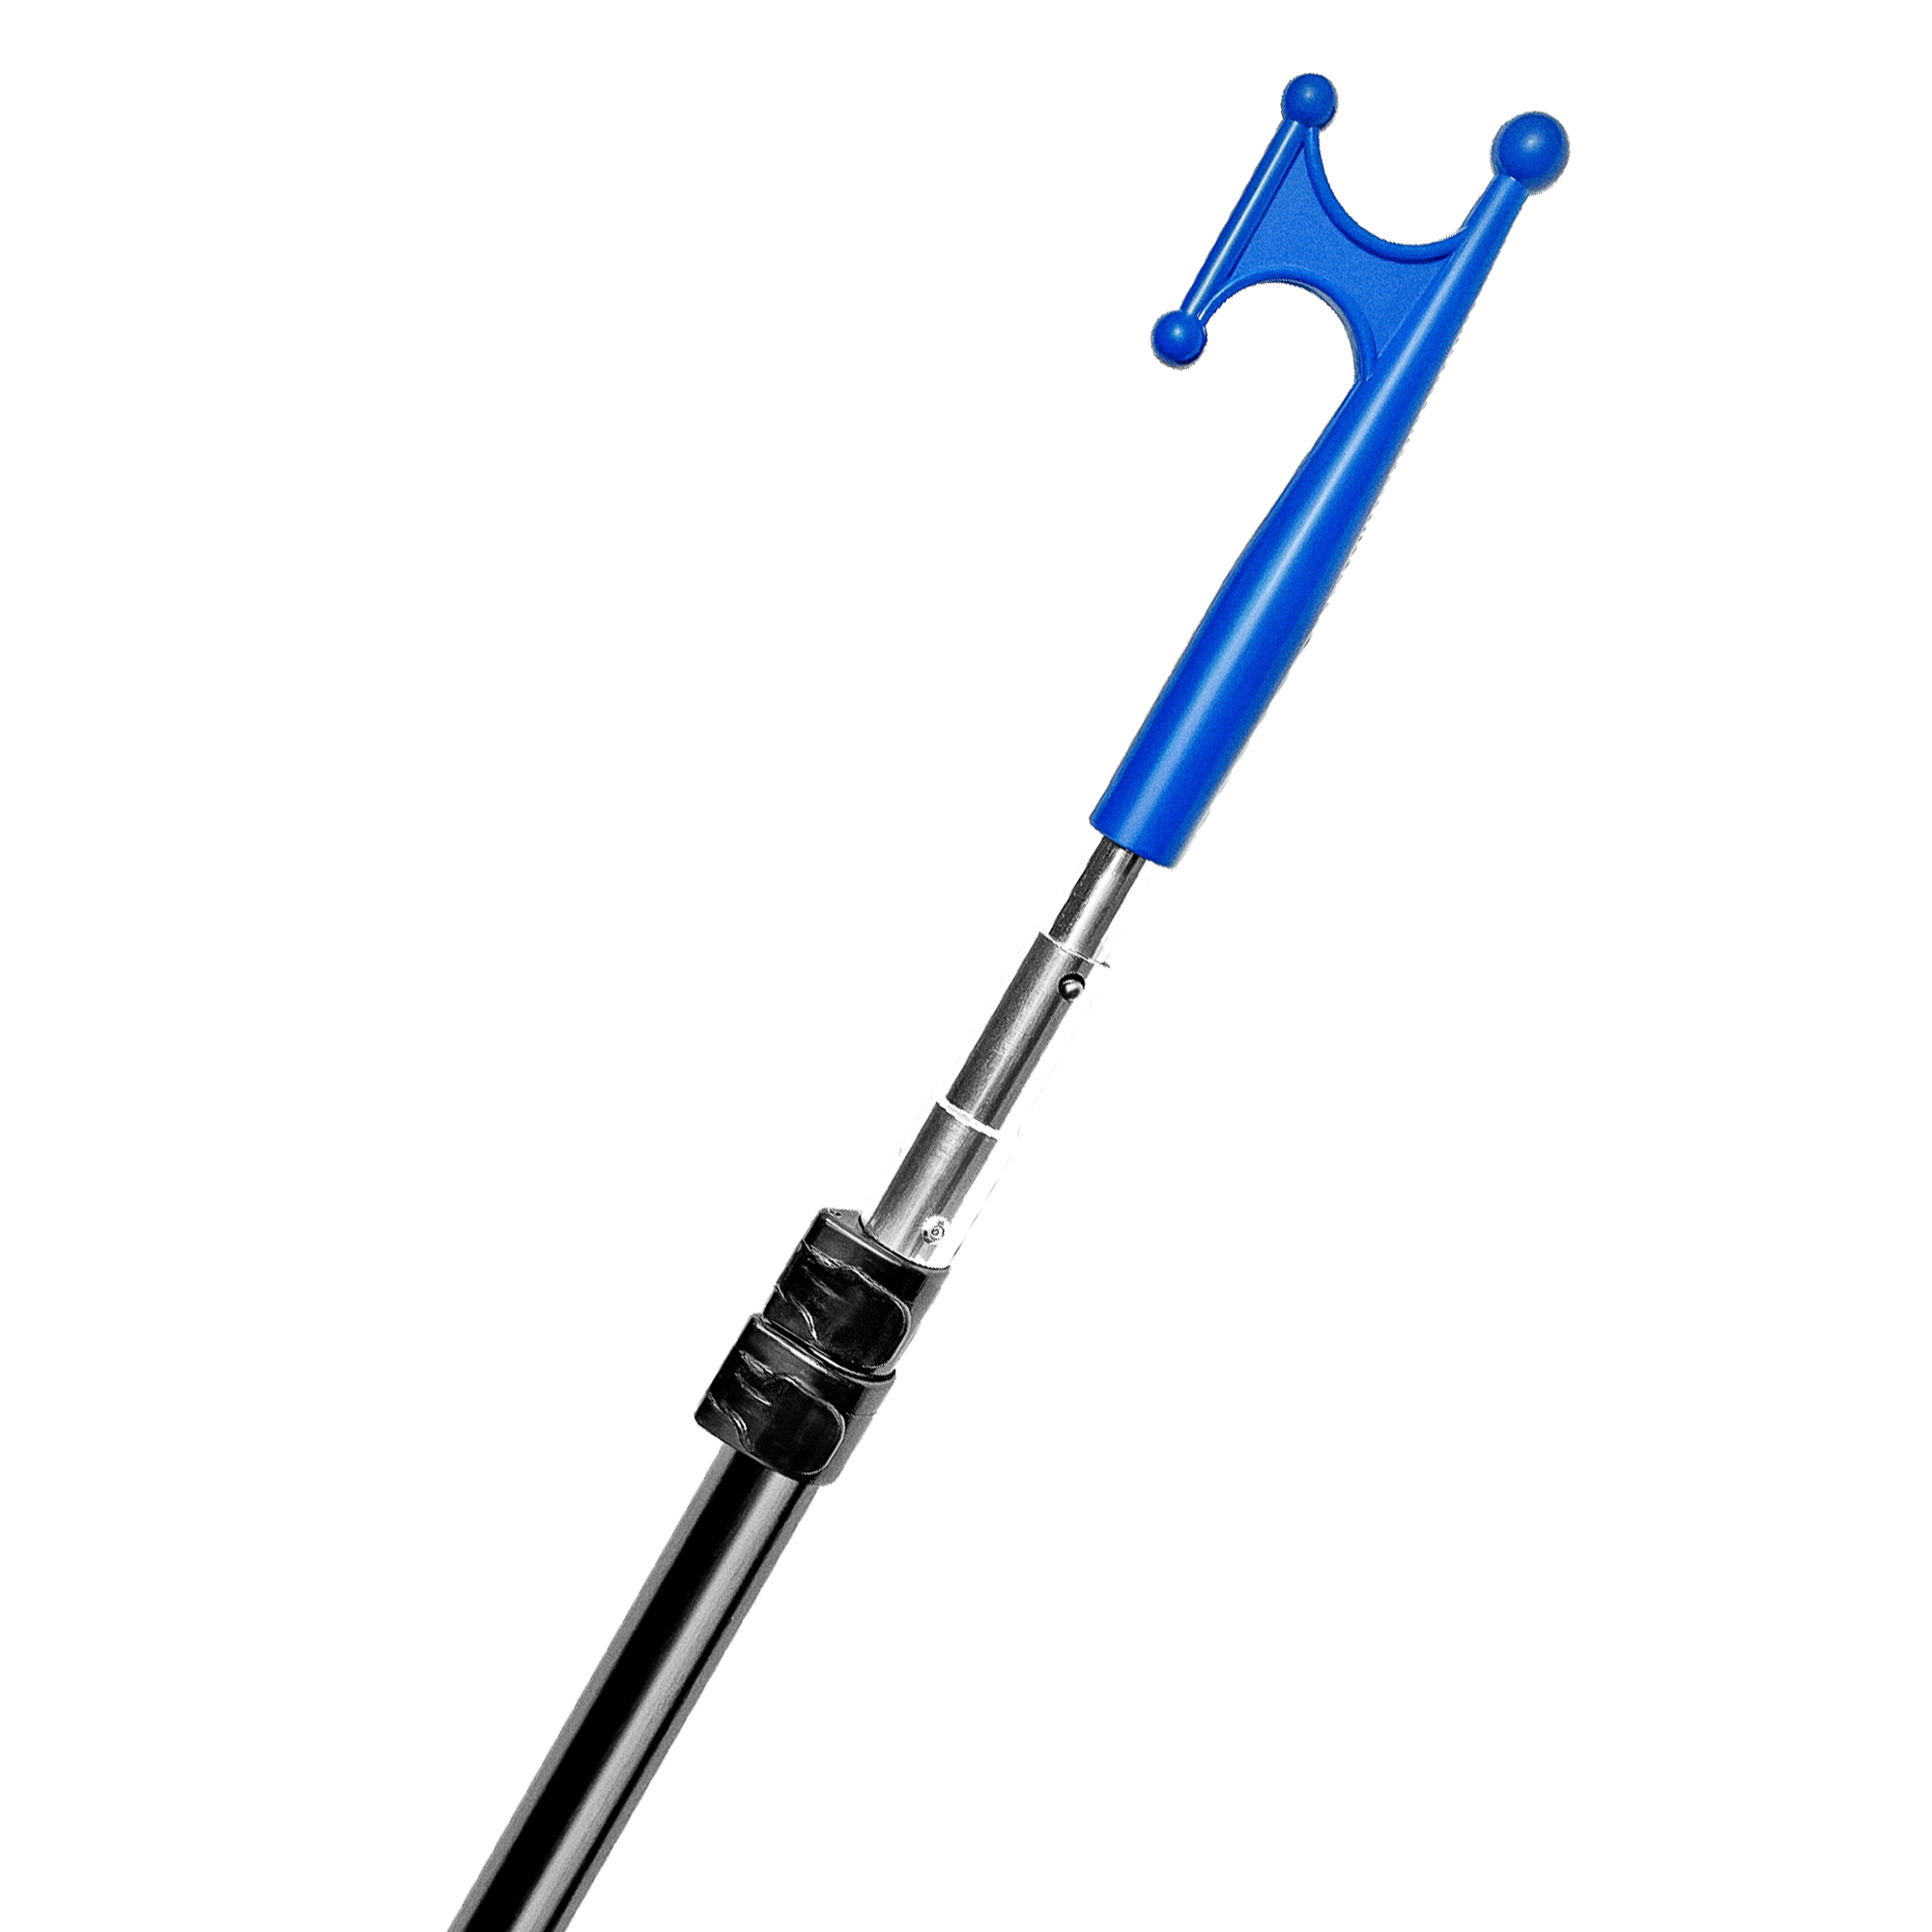 BTG Gear Telescoping Boat Pole w/ Hook for Docking, Floating, Extra-Strong  Aluminum